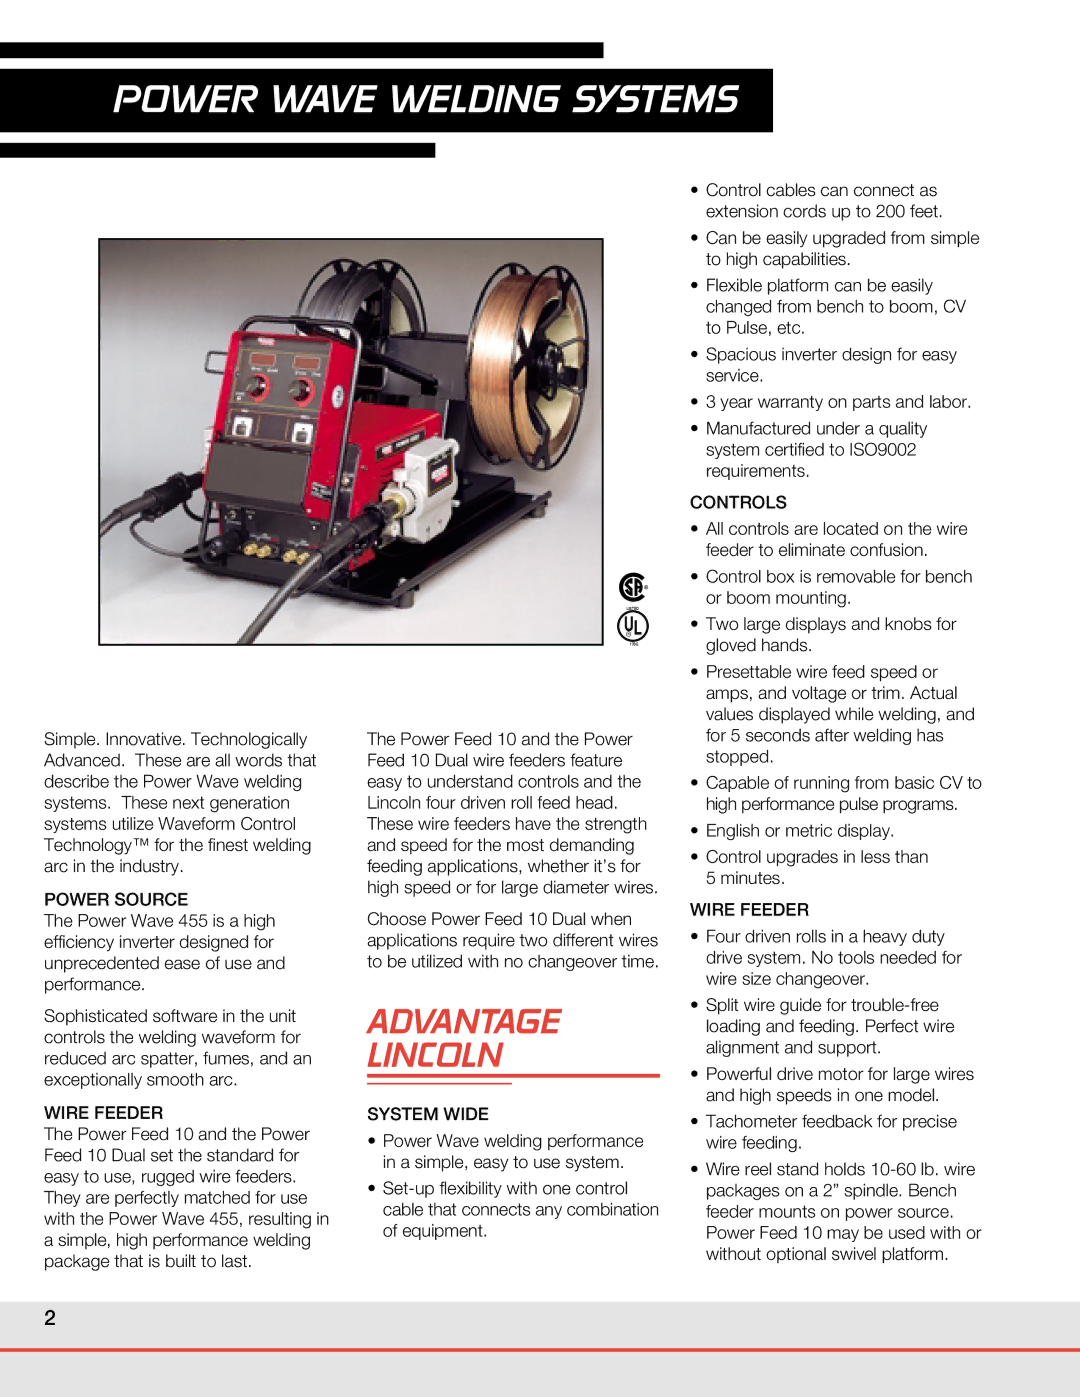 Lincoln Electric WELDING SYSTEMS manual Advantage Lincoln, Power Source, Wire Feeder, System Wide, Controls 